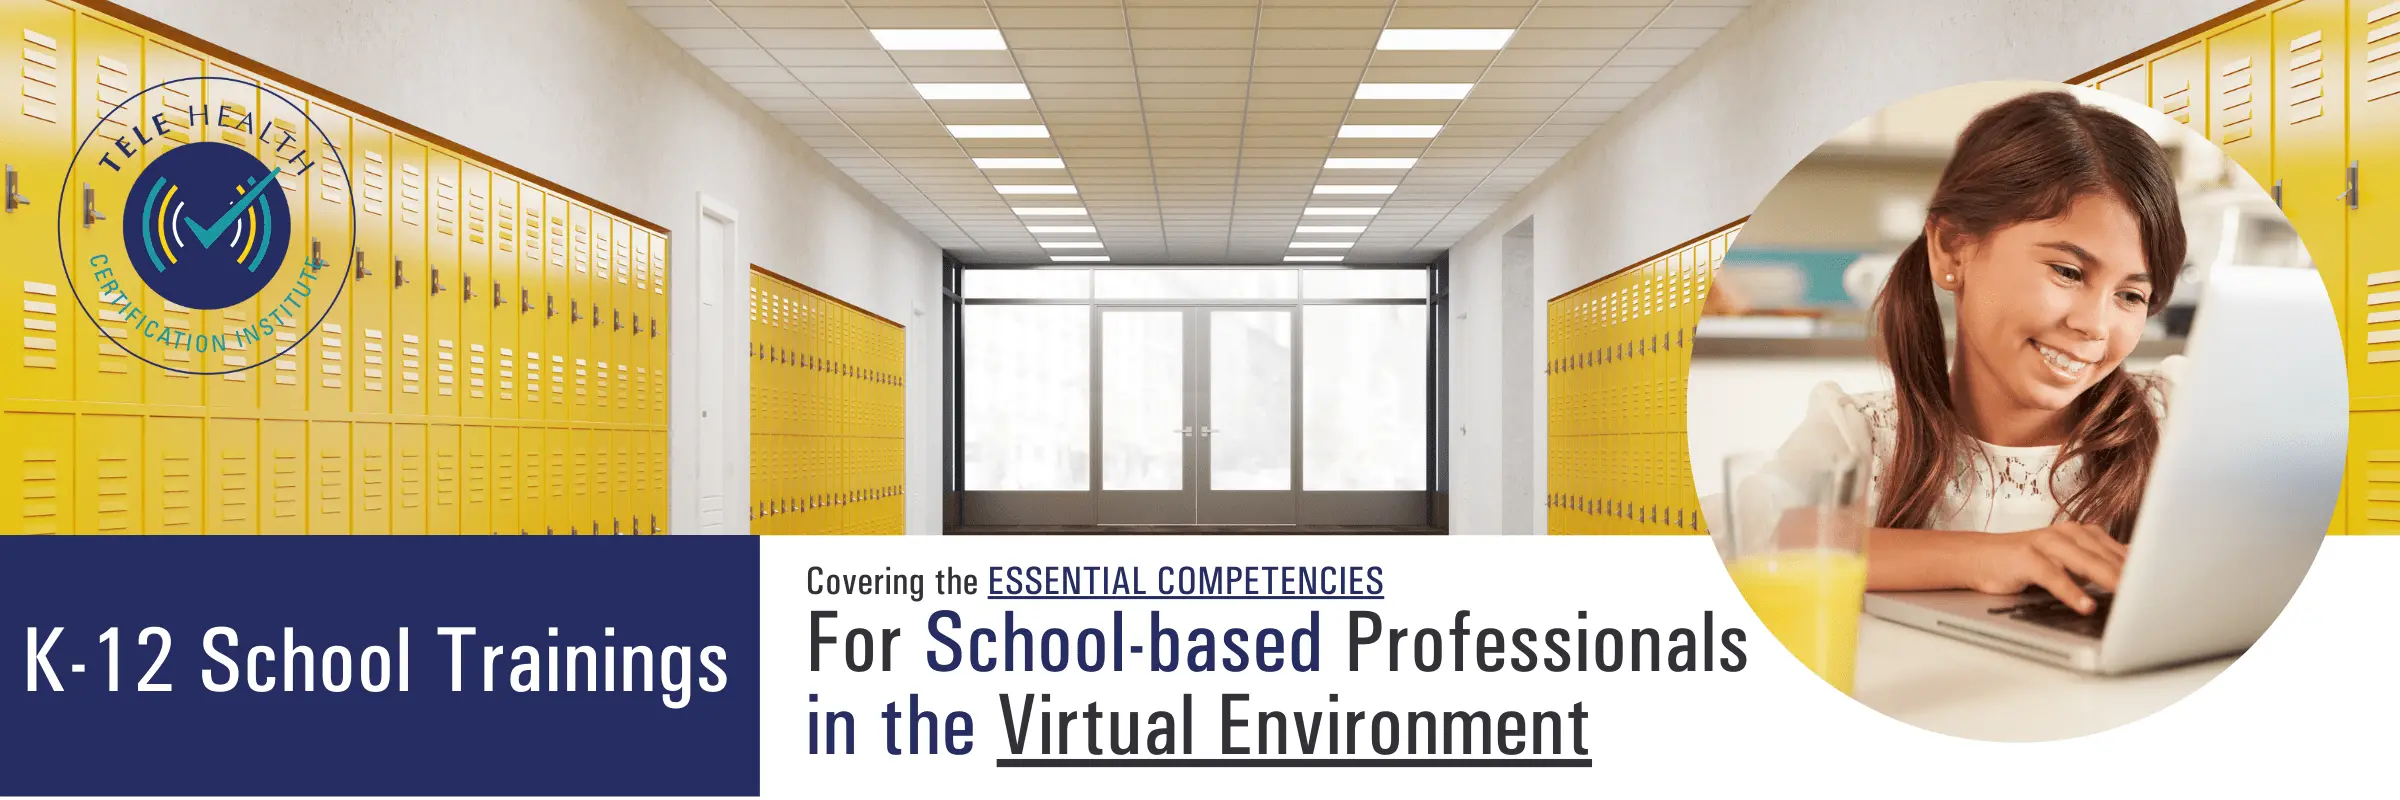 School hallway with yellow lockers, K-12 training for the virtual enviornment